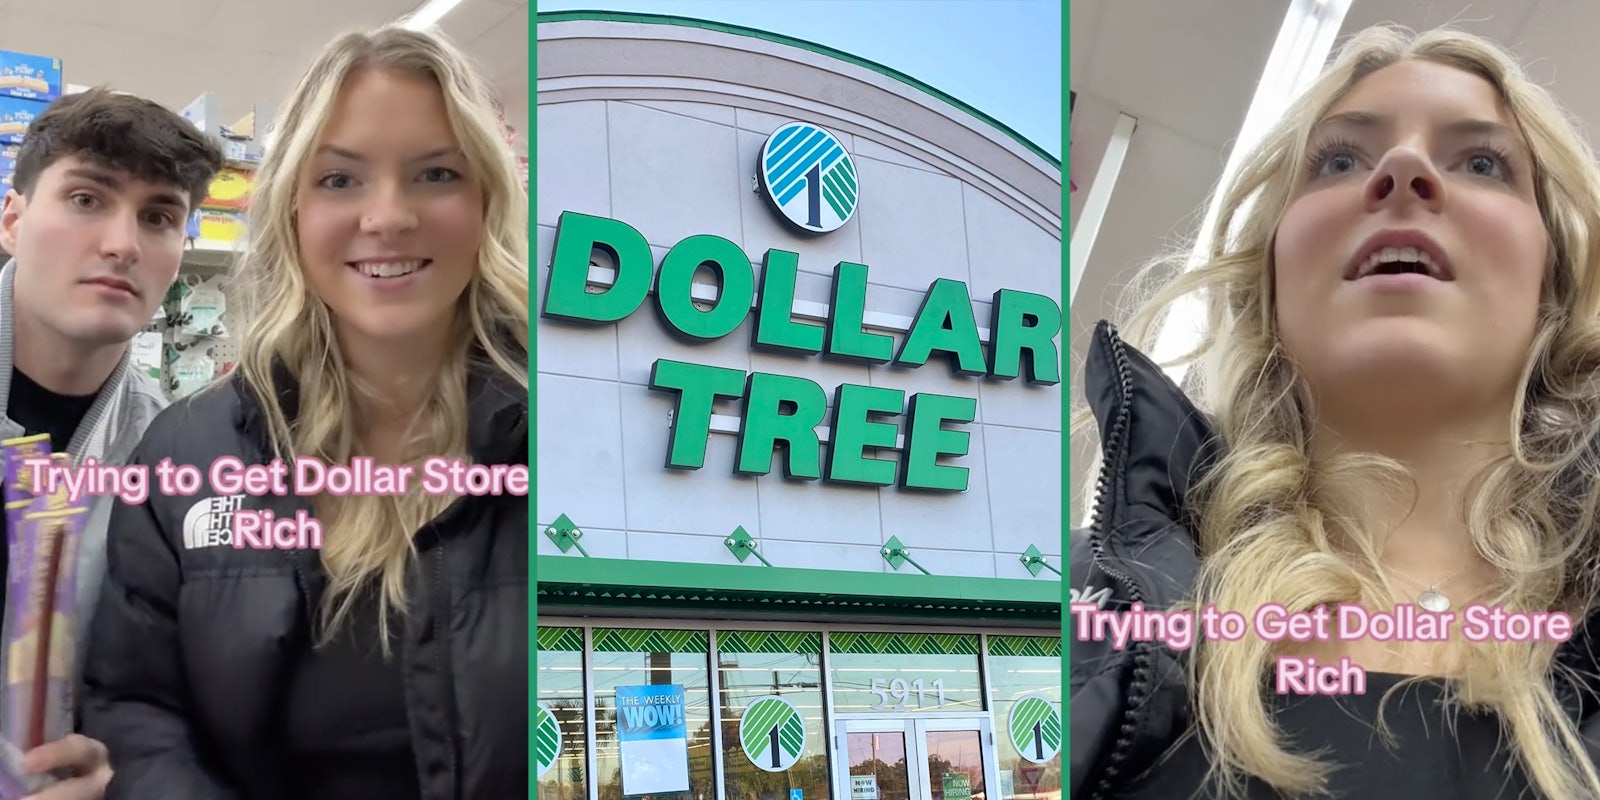 Man and woman with beef jerky(l), Dollar Tree storefront(c), Woman looking surprised(r)